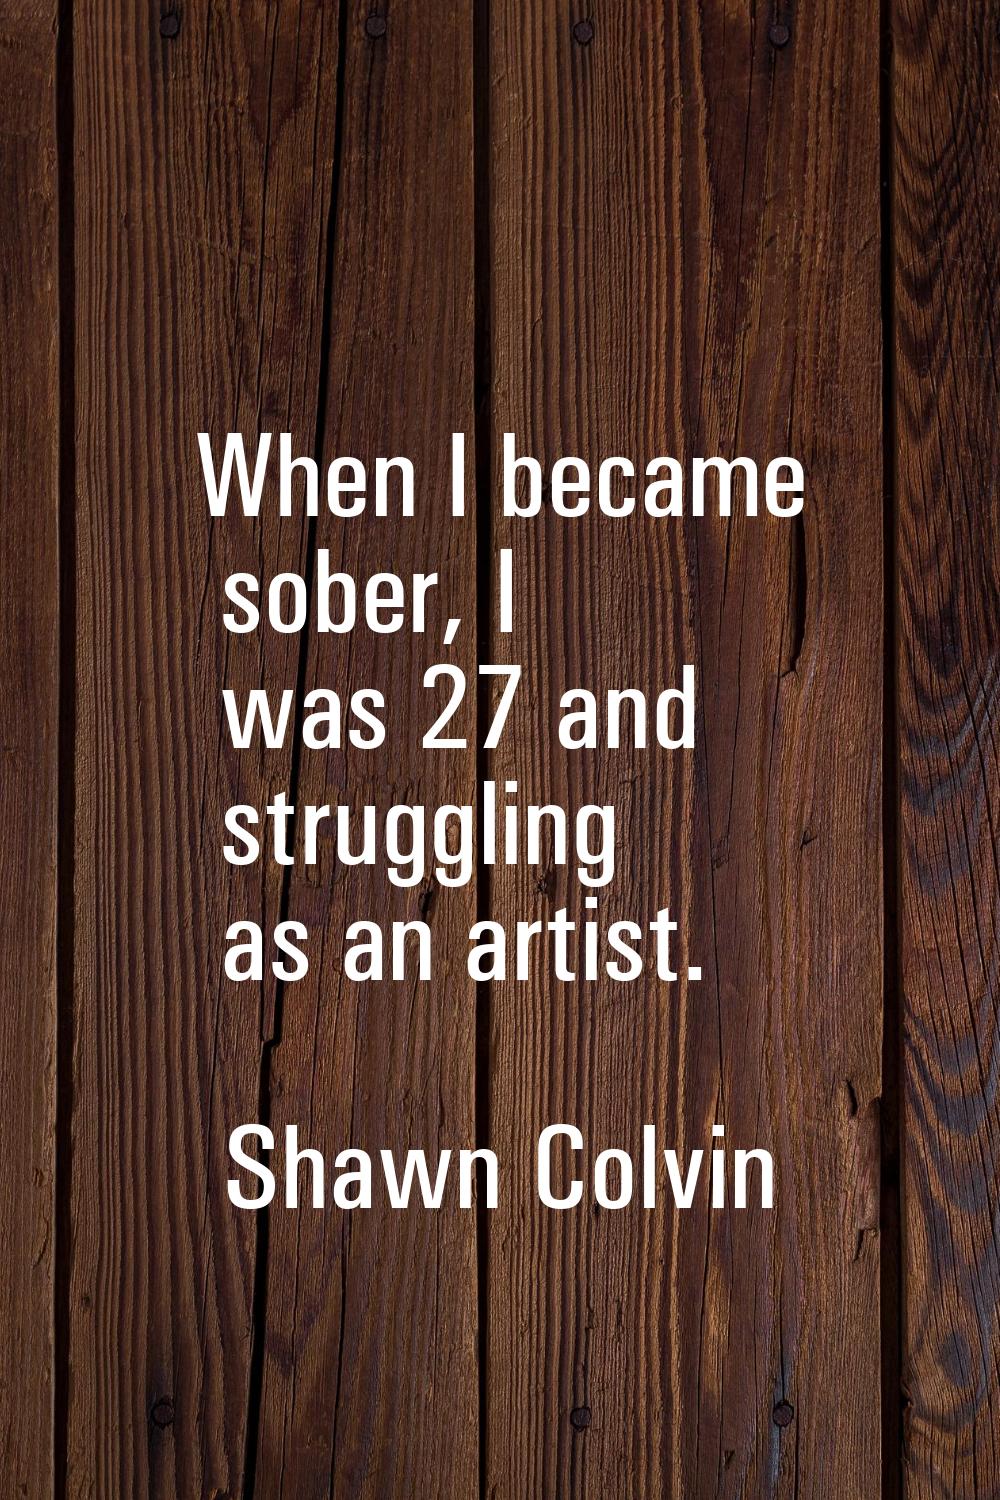 When I became sober, I was 27 and struggling as an artist.